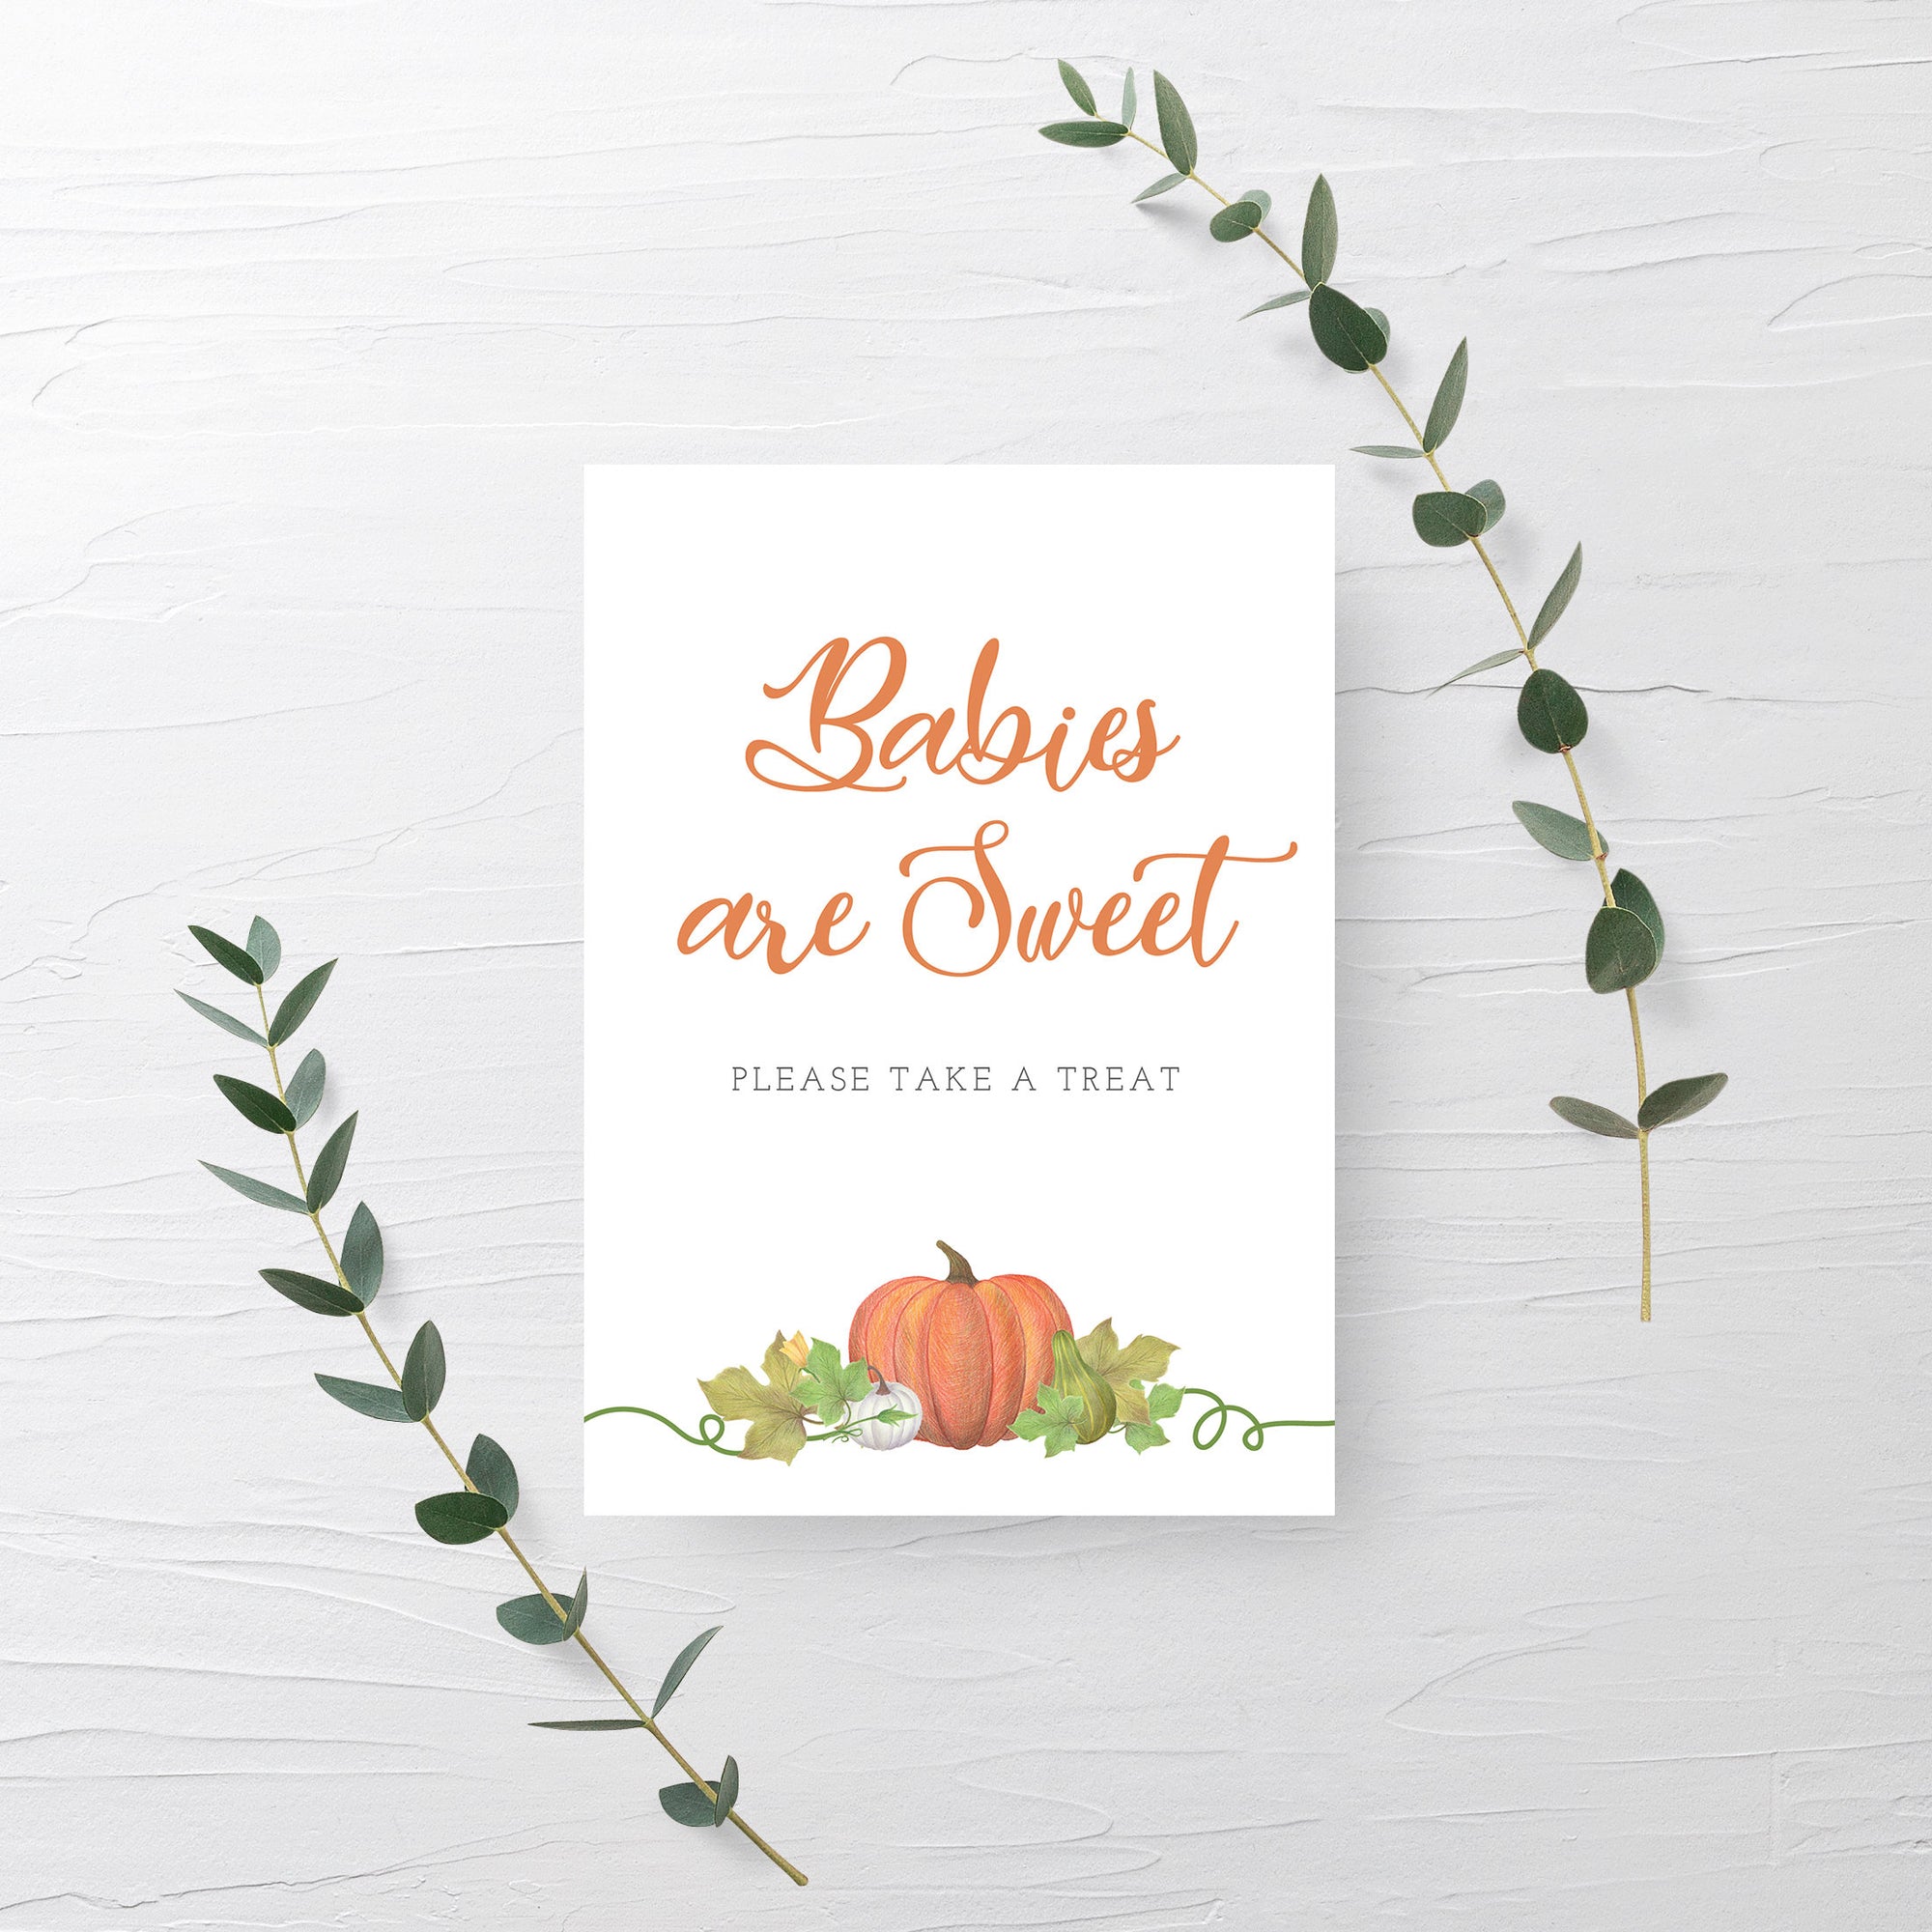 Little Pumpkin Baby Shower Decorations, Babies are Sweet Printable Treat Sign, Pumpkin Baby Shower Sign, INSTANT DOWNLOAD - HP100 - @PlumPolkaDot 